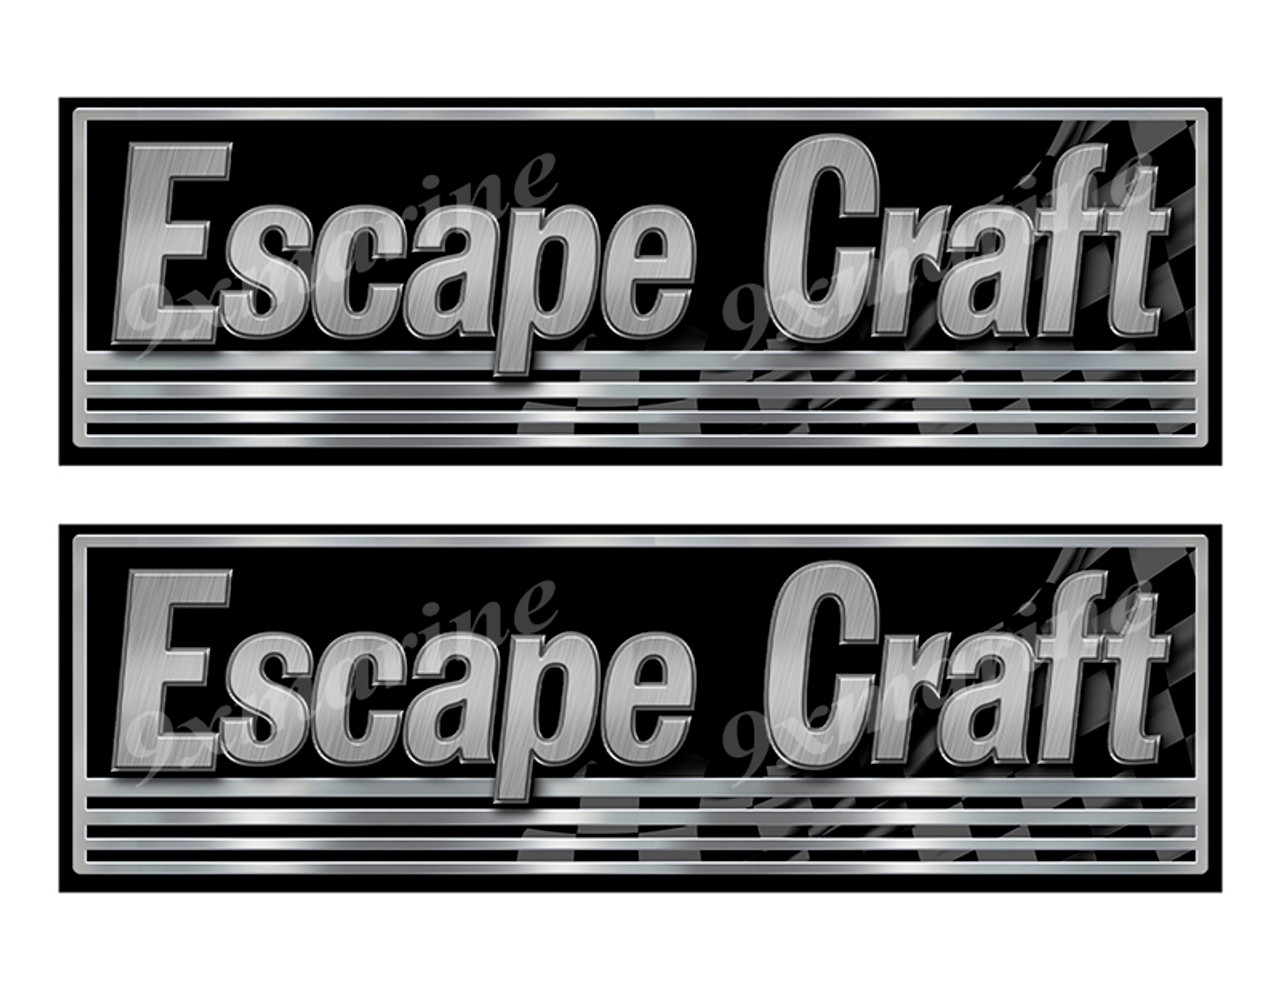 2 Escape Craft Boat Classic Stickers. Remastered Name Plate